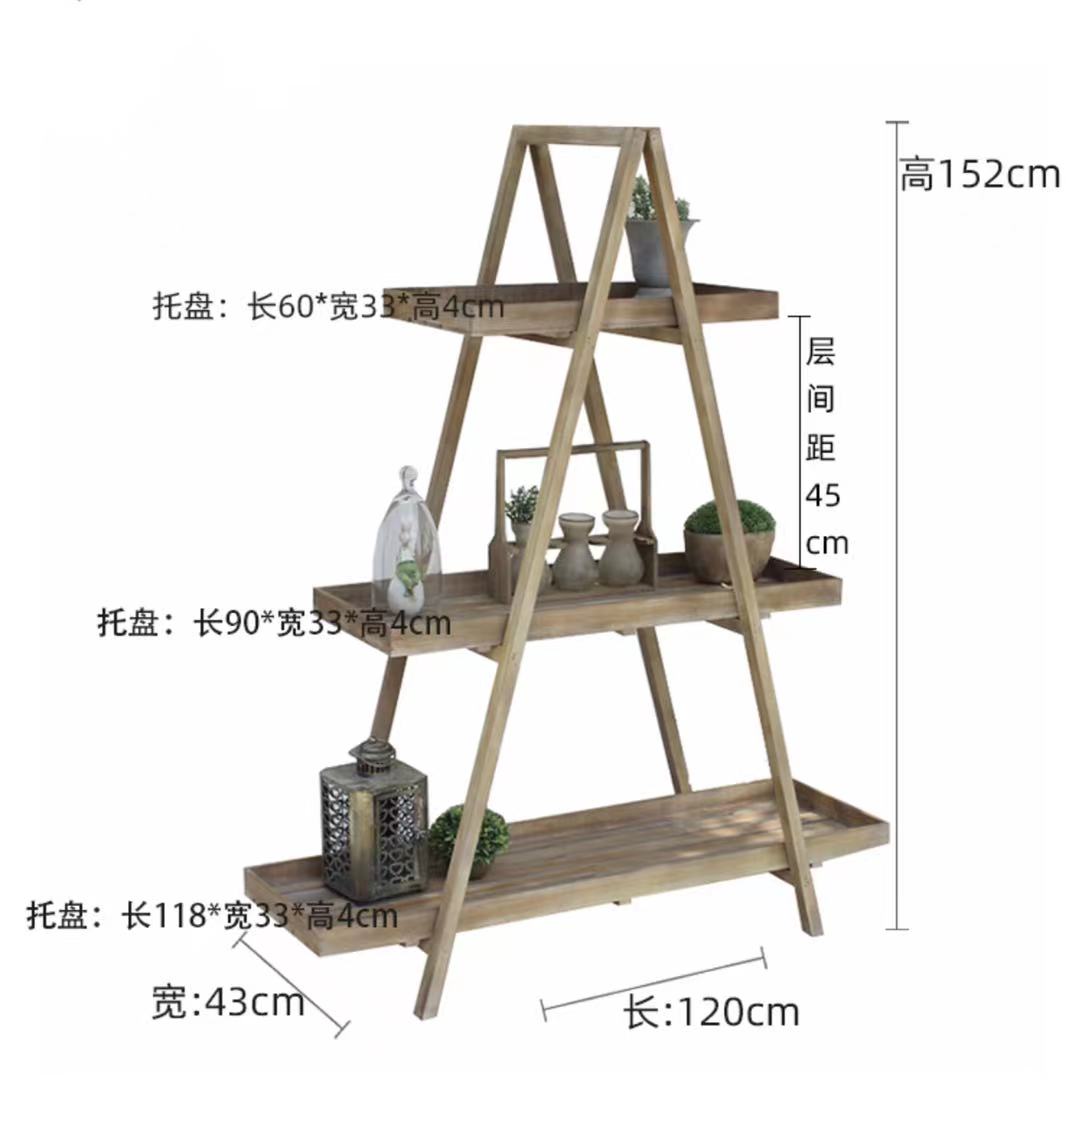 3 Tier Wood Plant Stand - 4 Seasons Home Gadgets